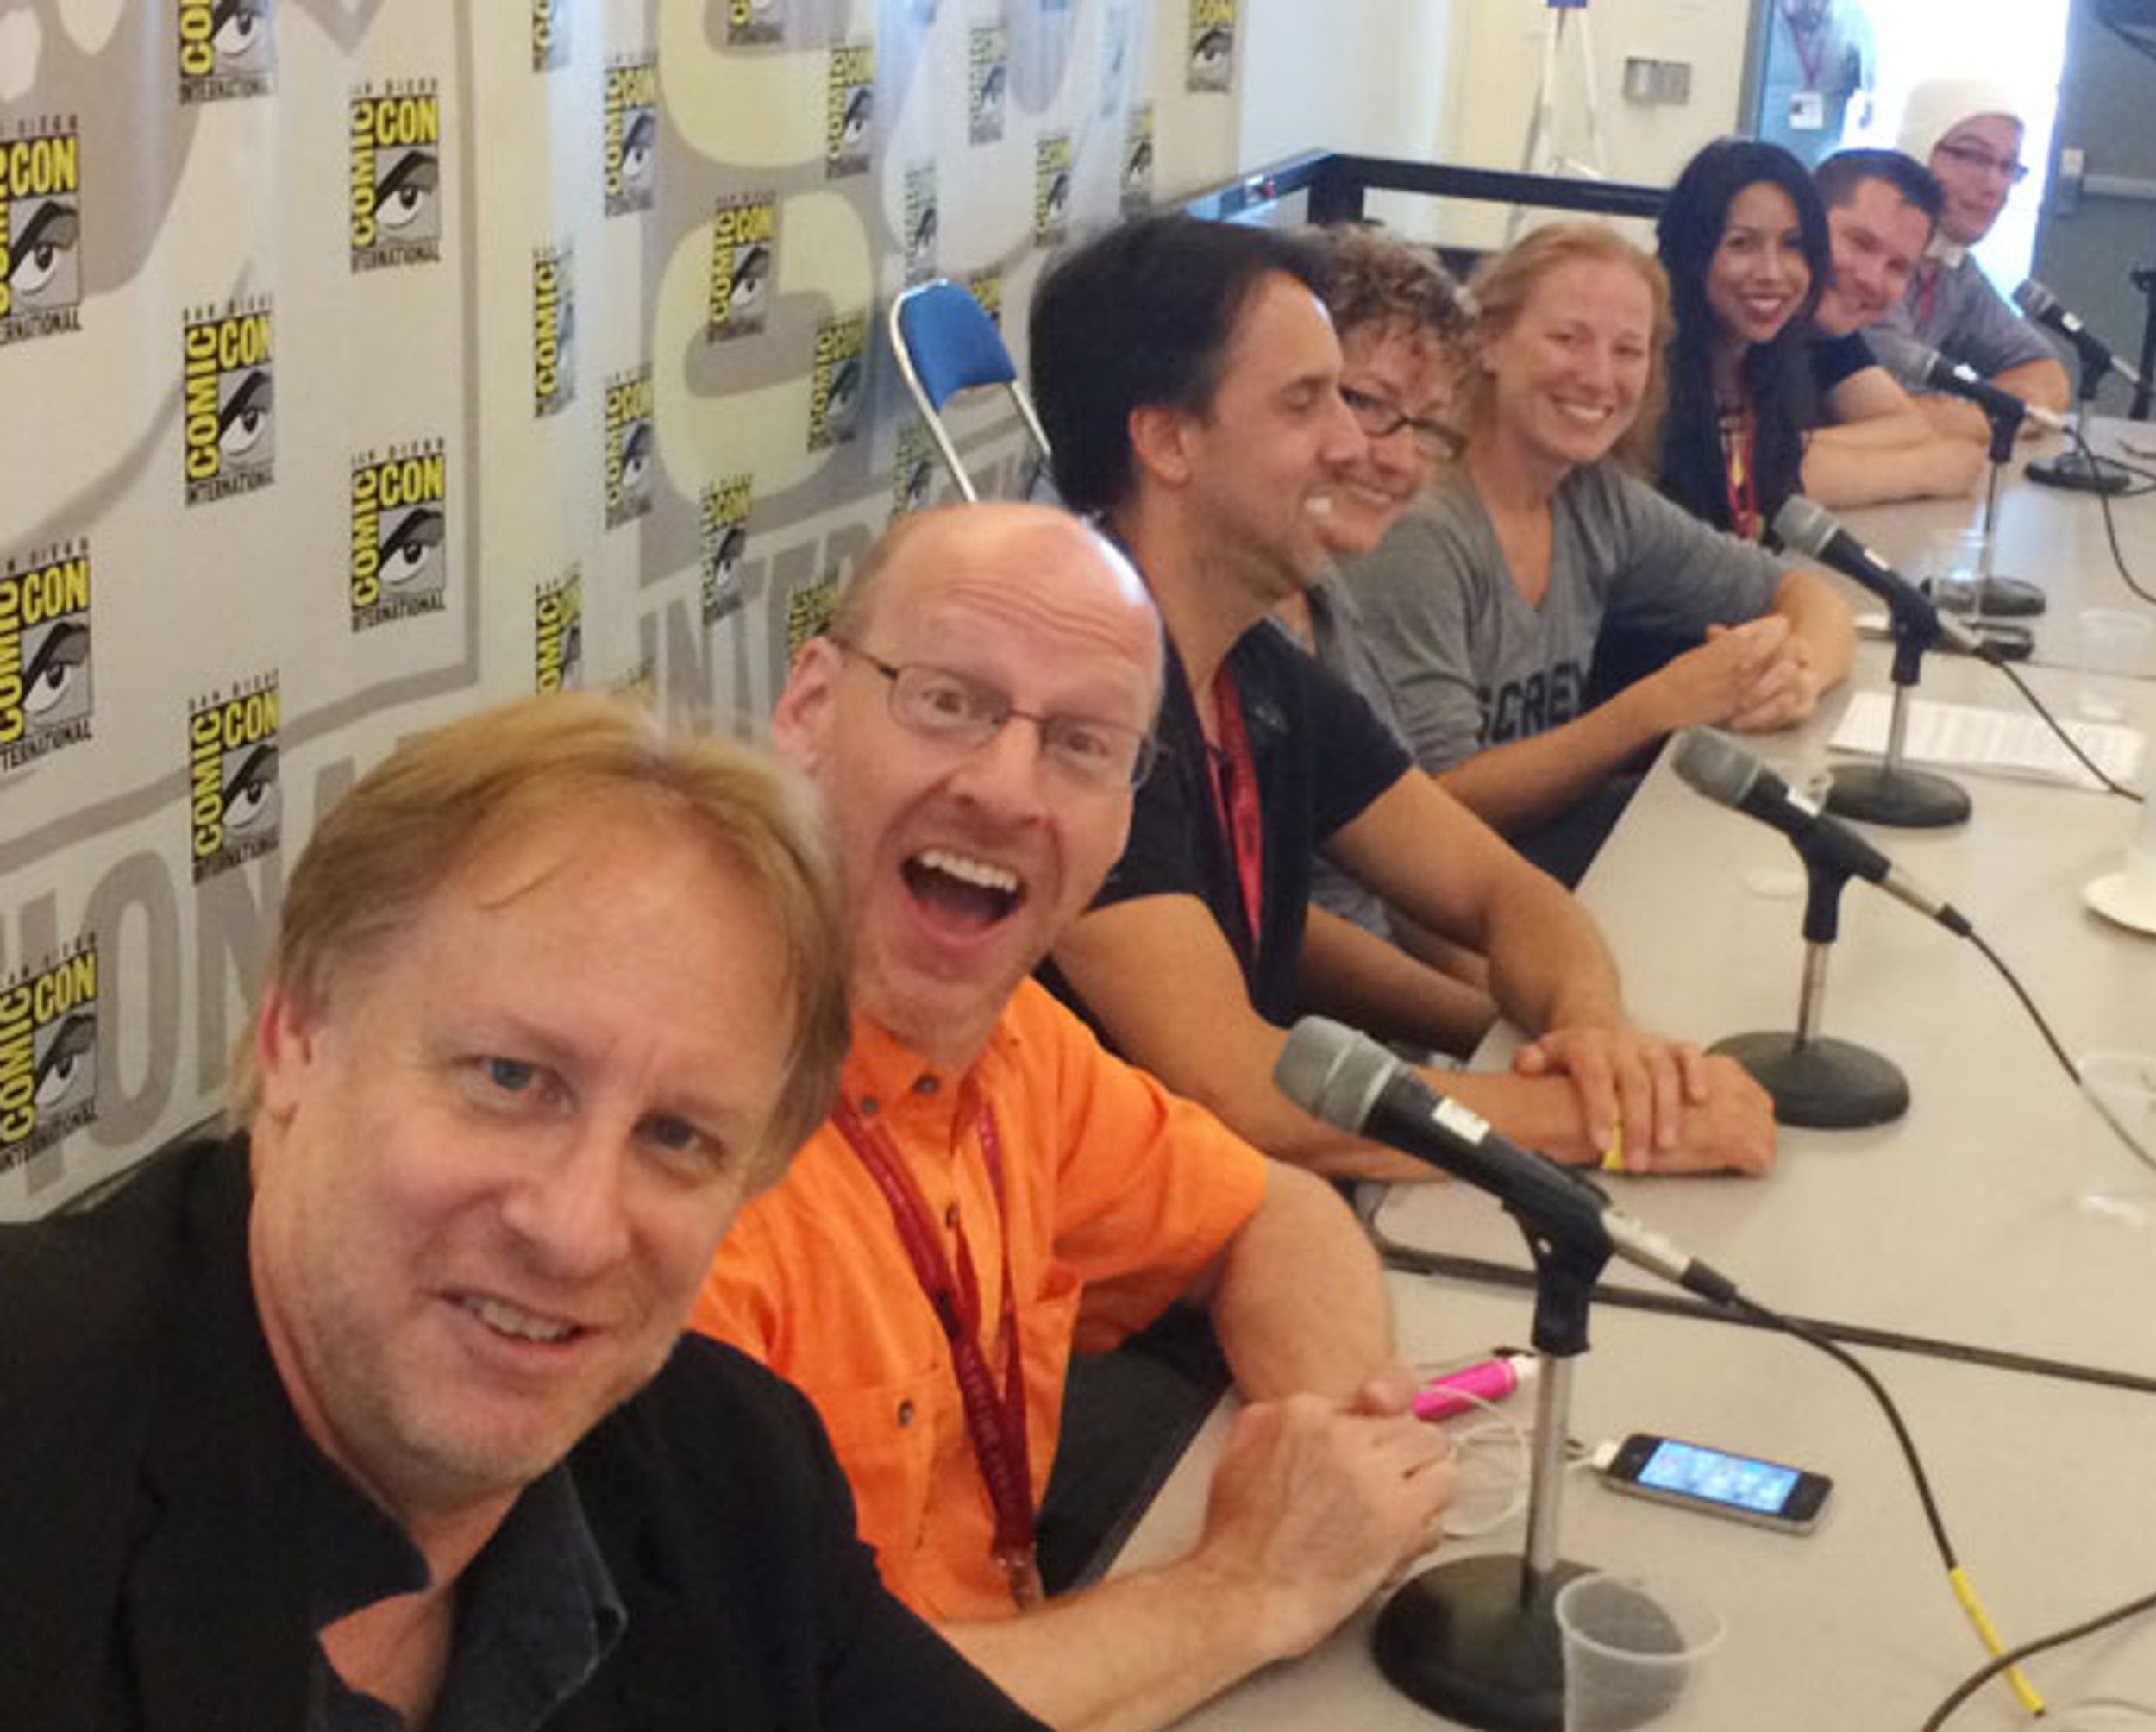 A row of 8 smiling people sitting at a table with a San Diego Comic backdrop behind them